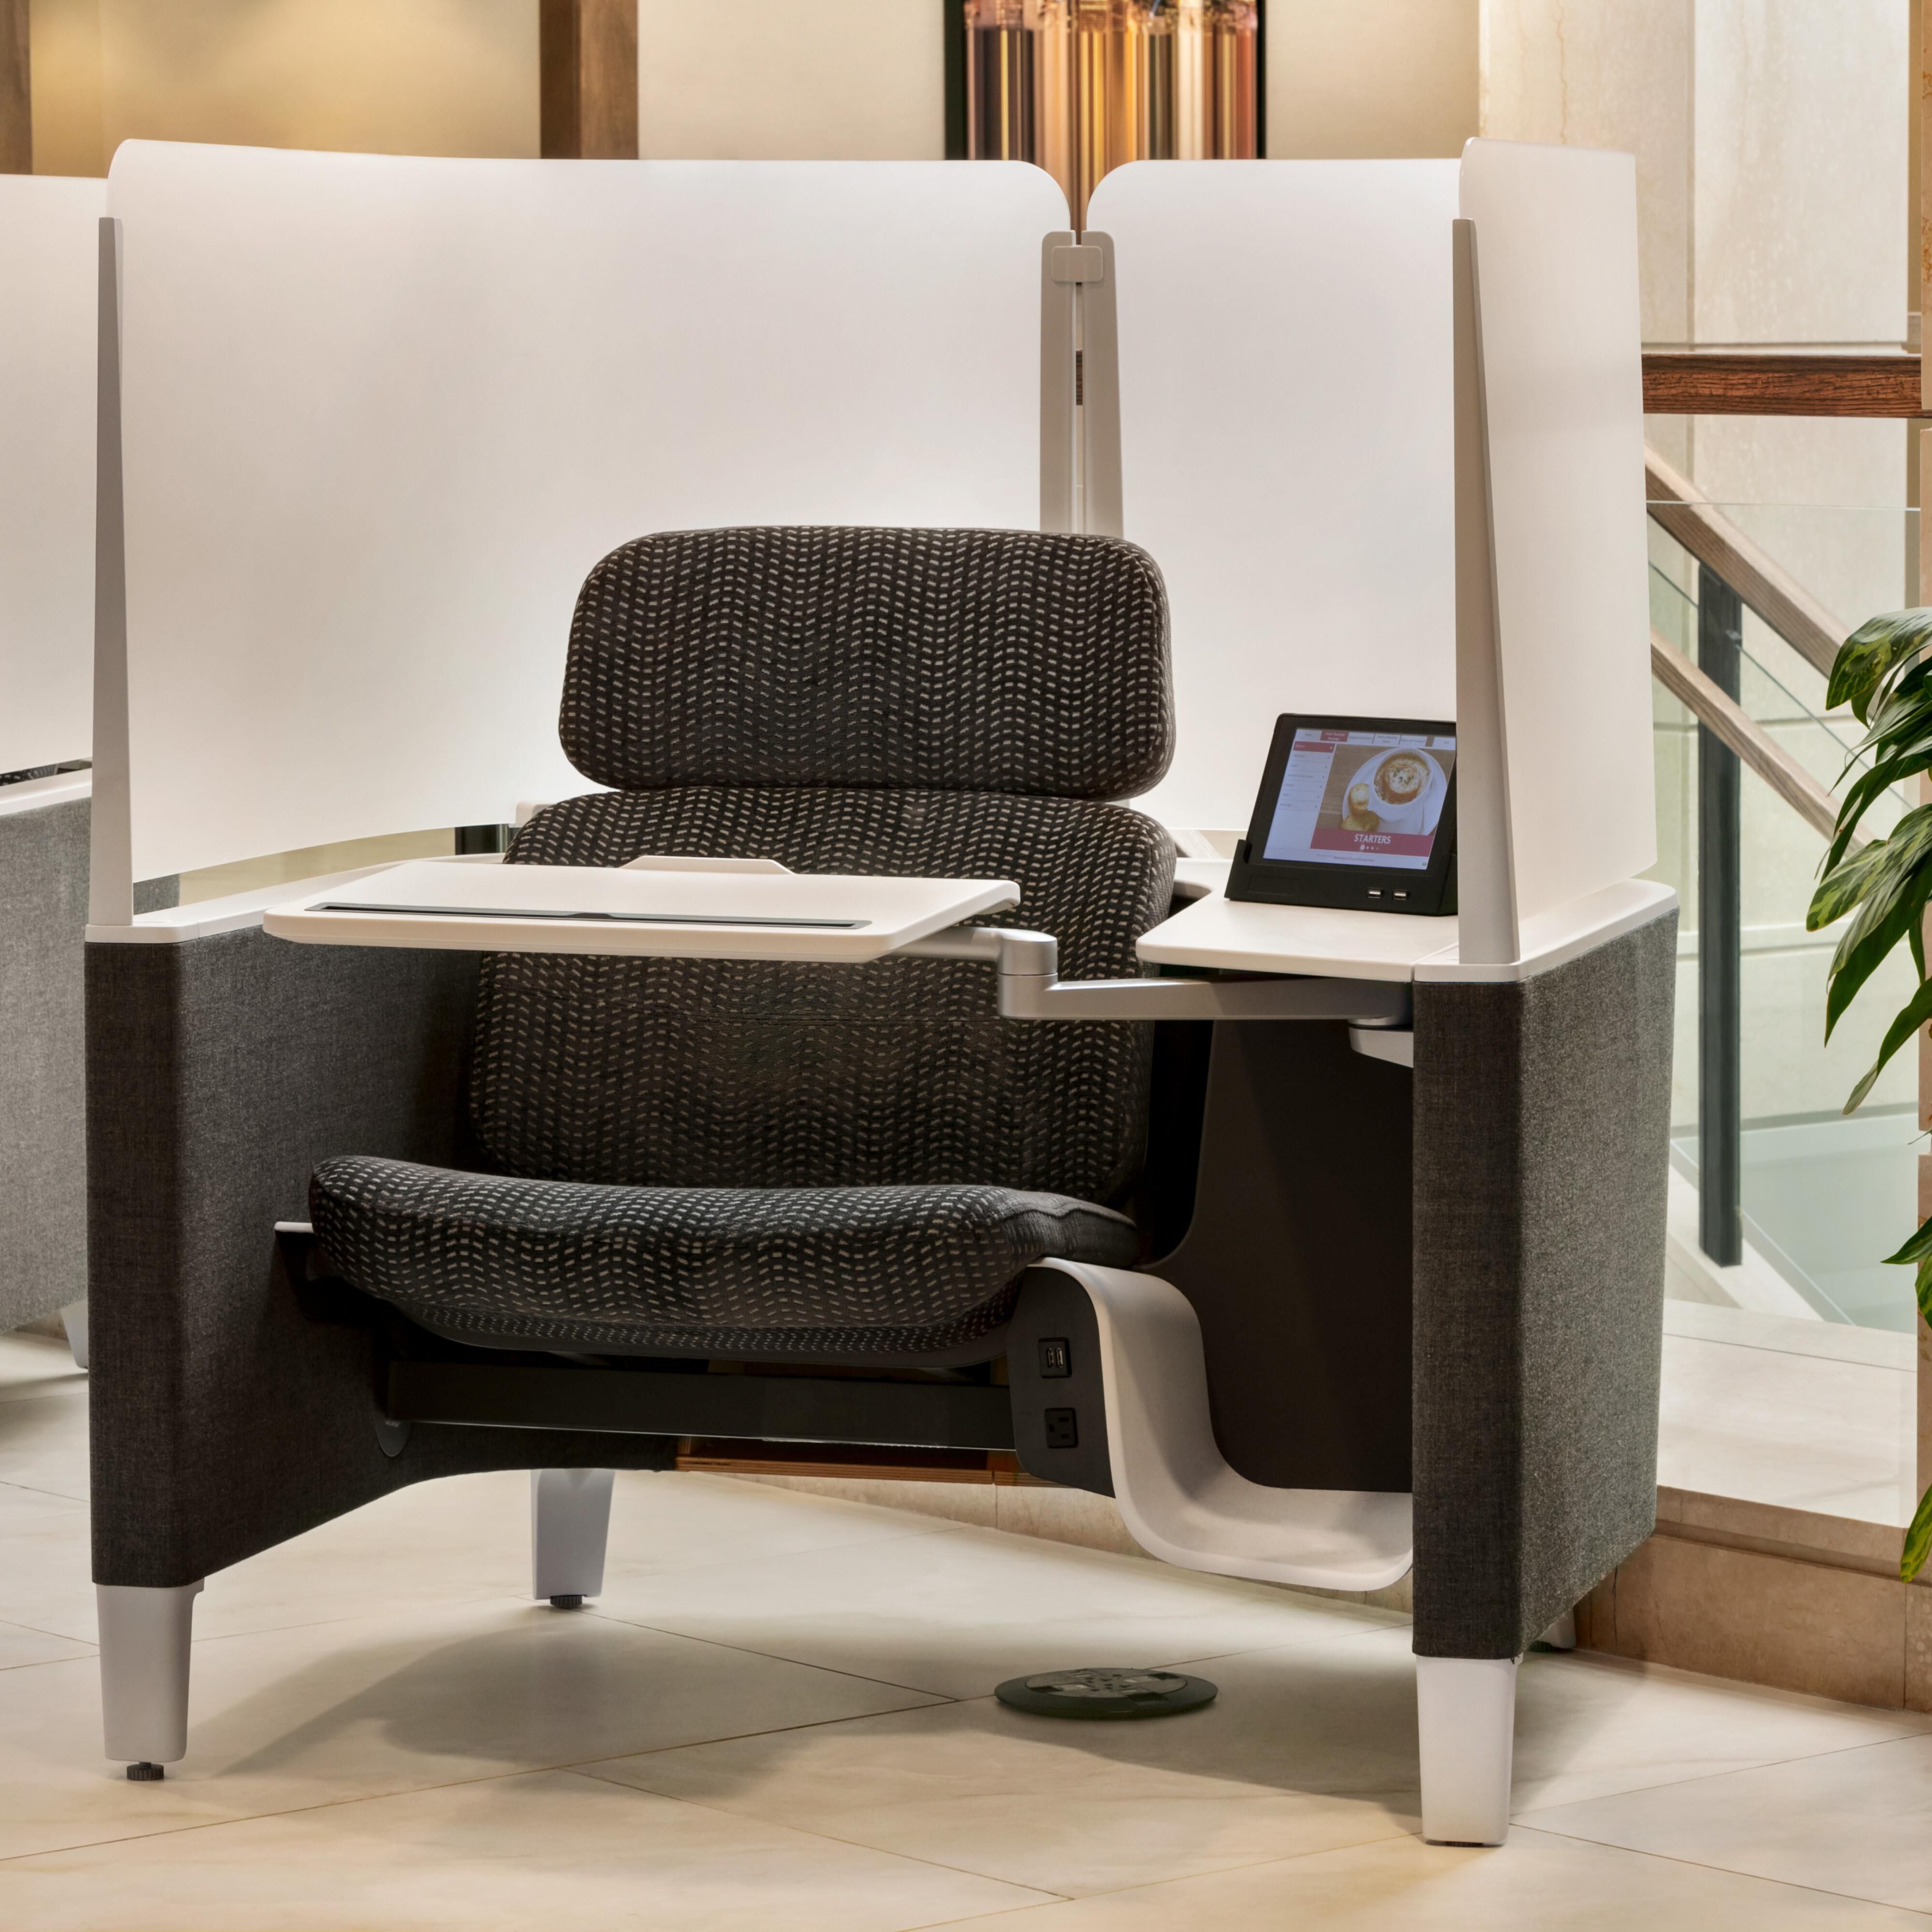 Order a drink while you work from the privacy of our new work pods